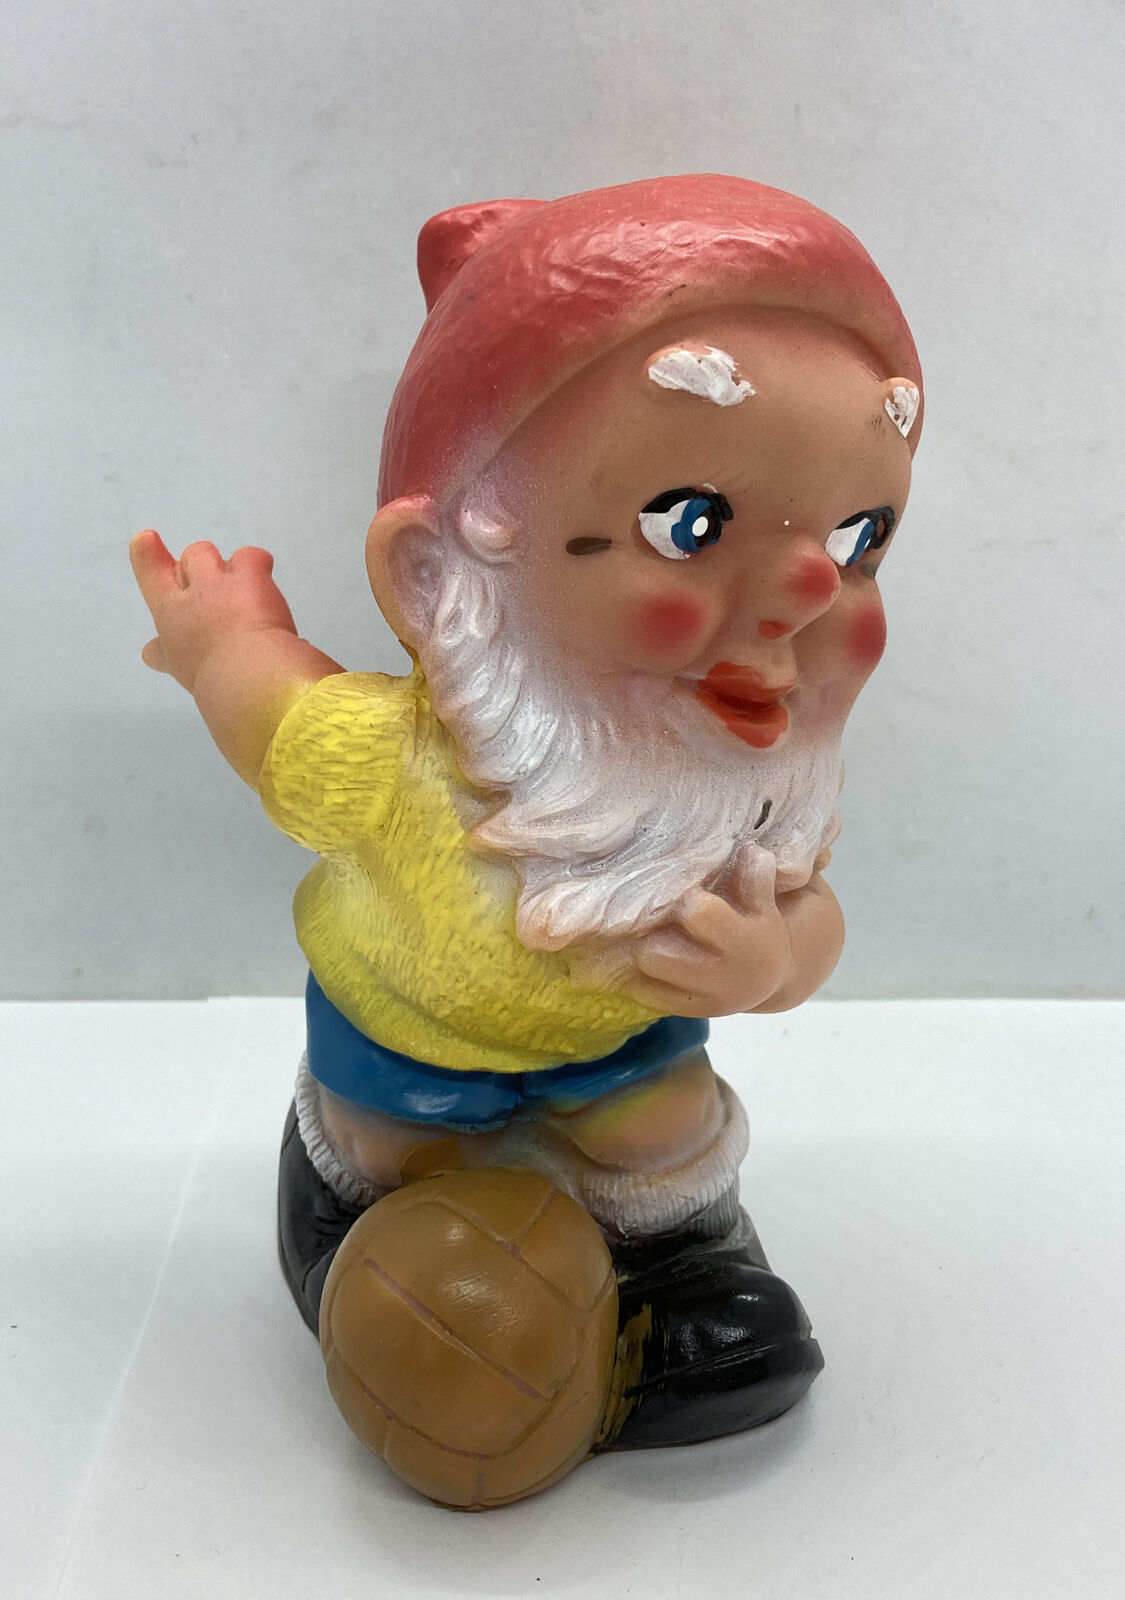 Vintage Gnome Rubber Plastic 6.5” Tall Soccer ball Made in Germany rare